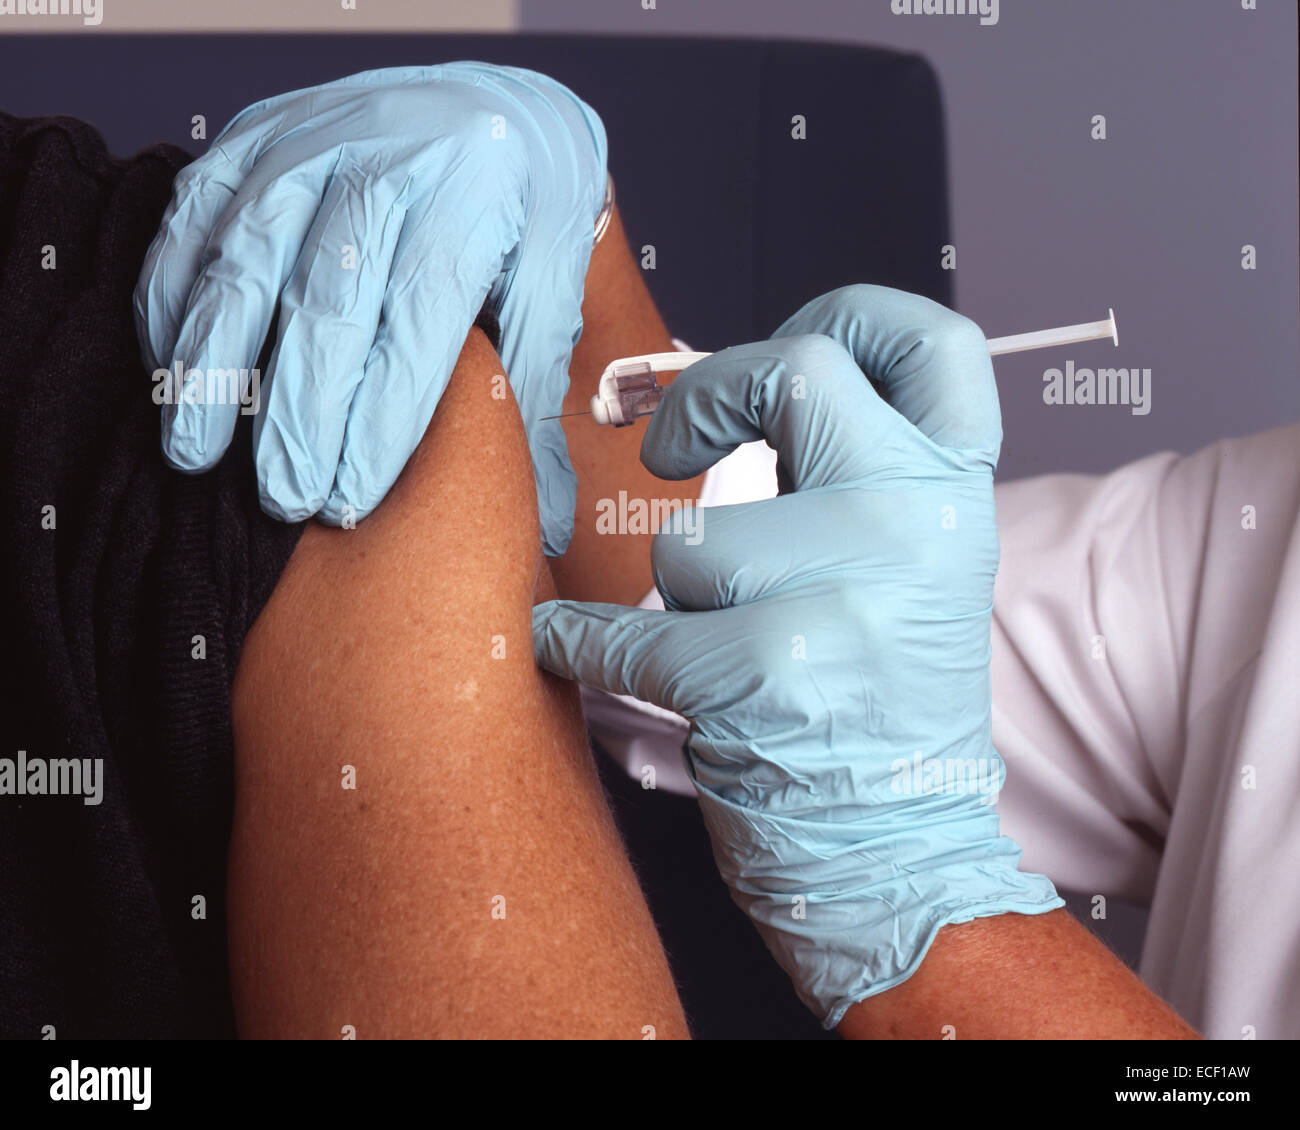 A nurse wearing blue gloves administers a vaccine (vaccination) into a male patient's arm. Stock Photo